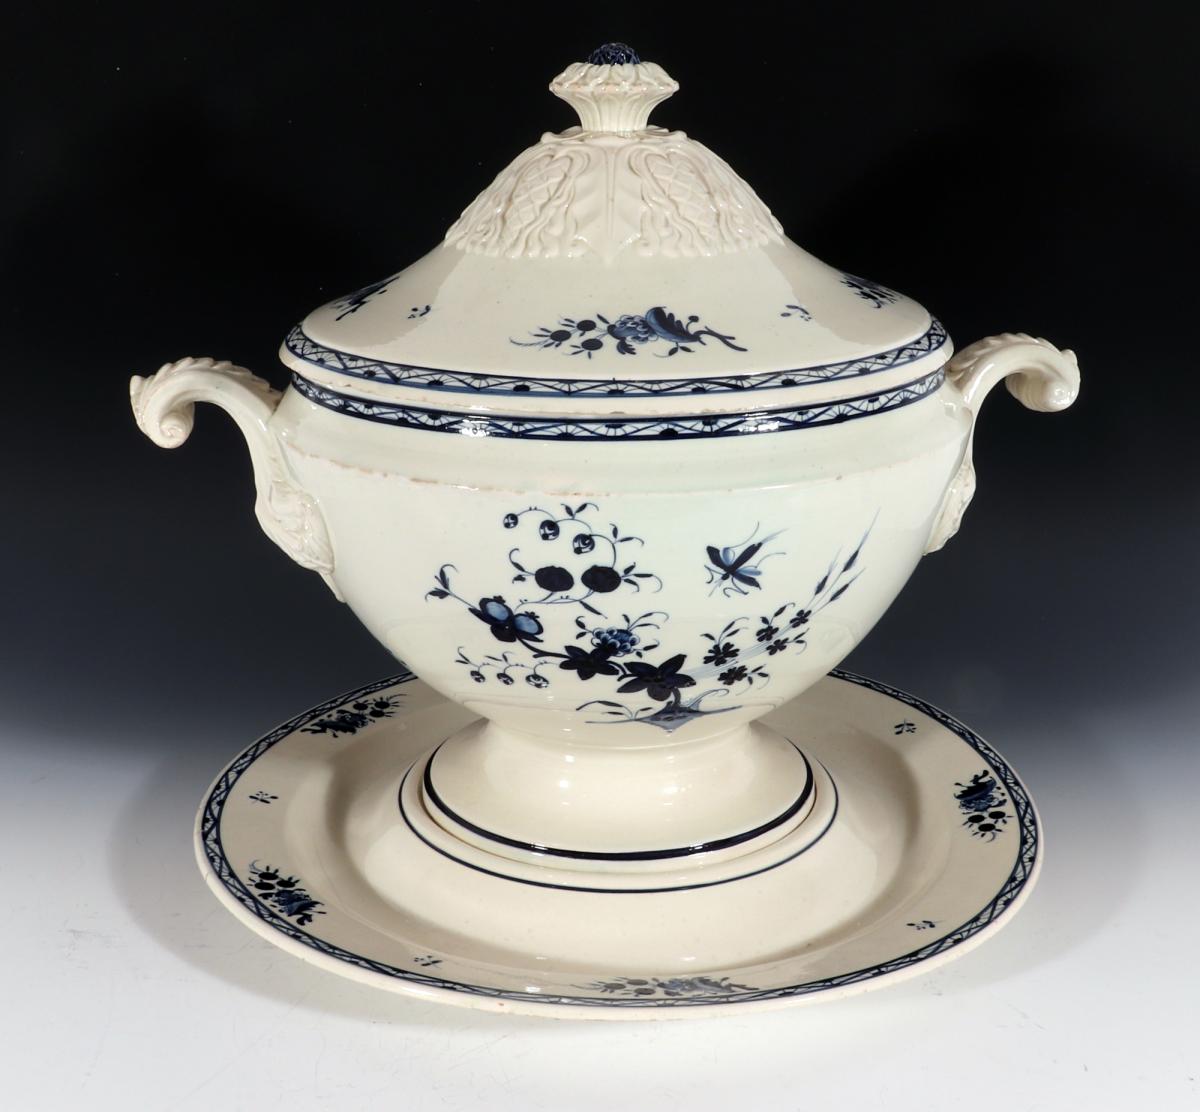 Continental Pottery Large Soup Tureen, Cover & Stand, Nimy Factory, Belgium, Early 19th Century.